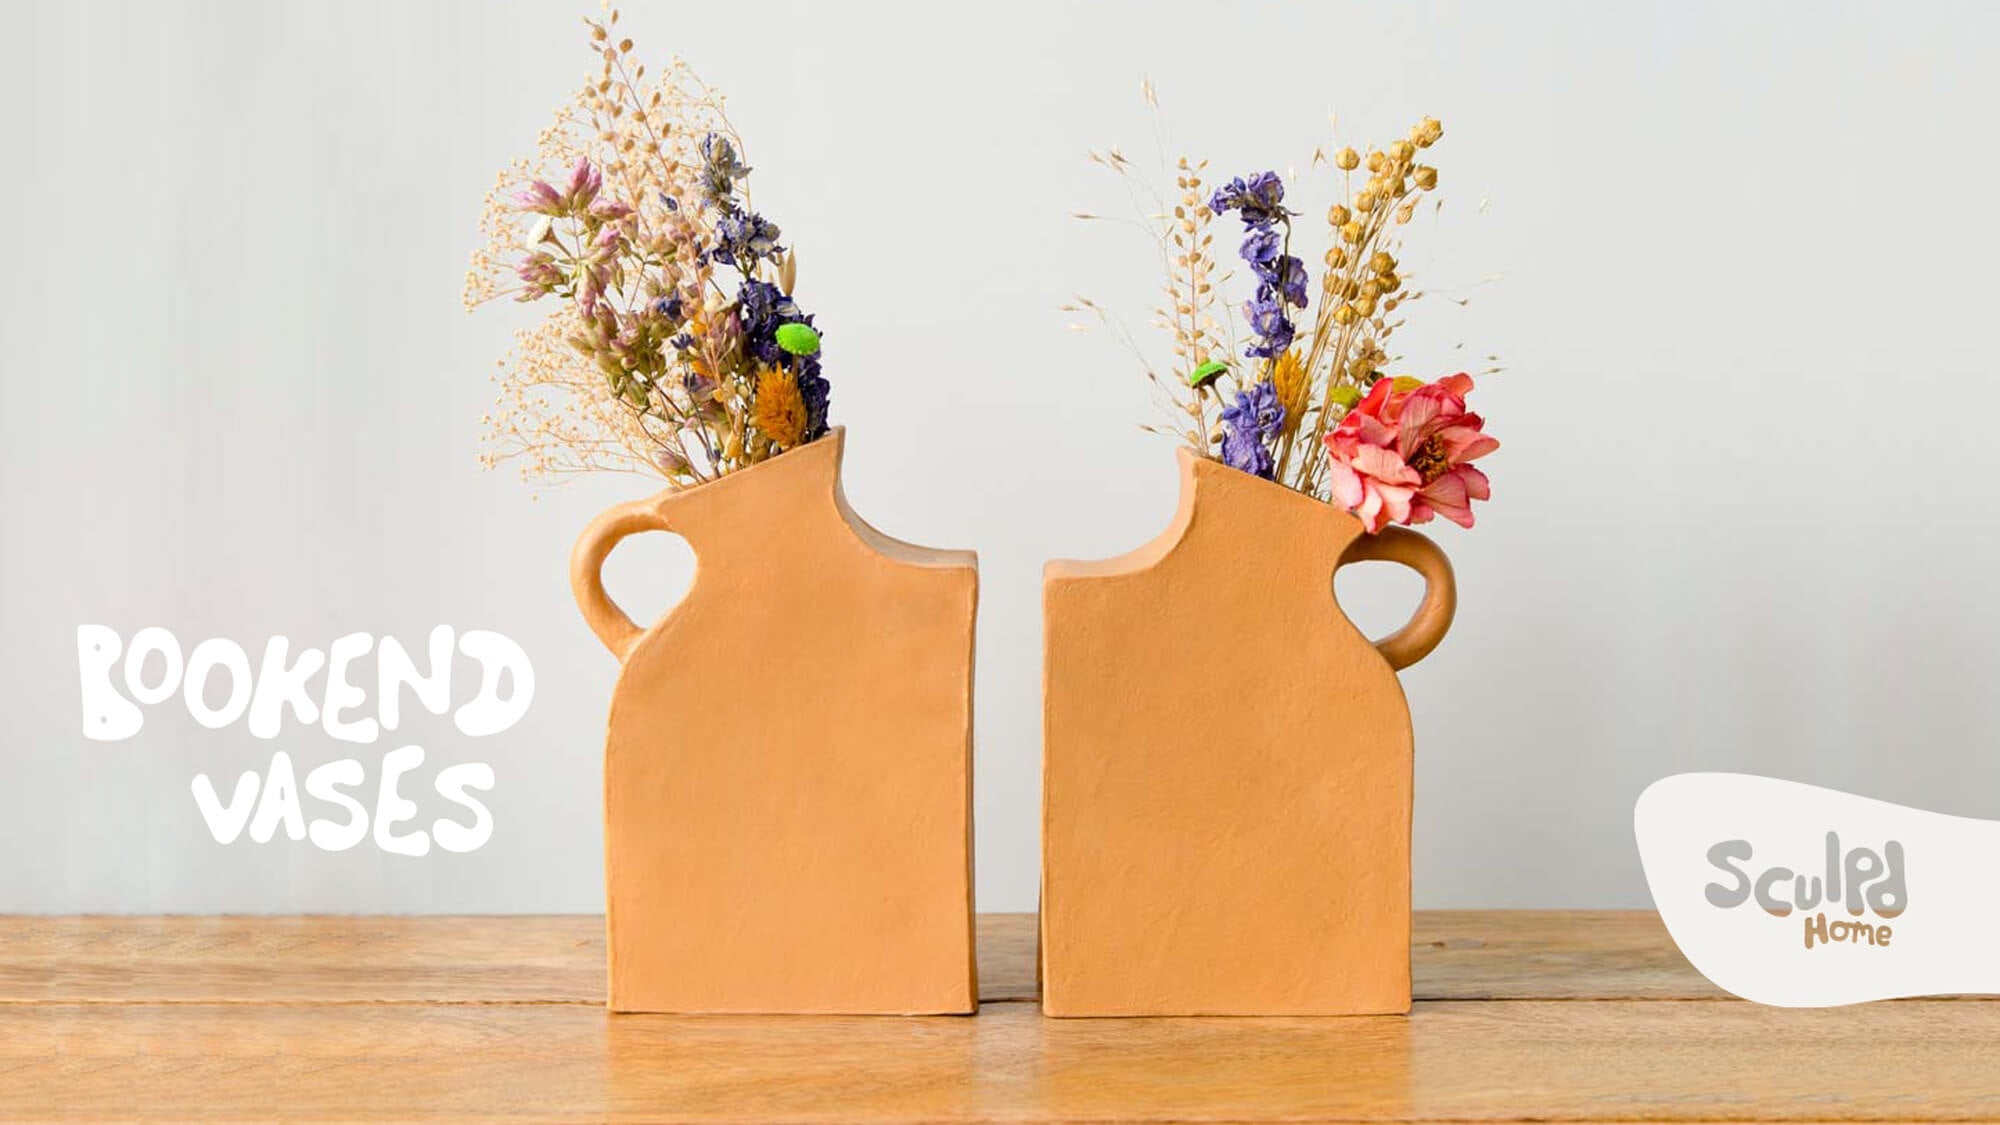 Make Your Own Bookend Vases | By Sculpd Home